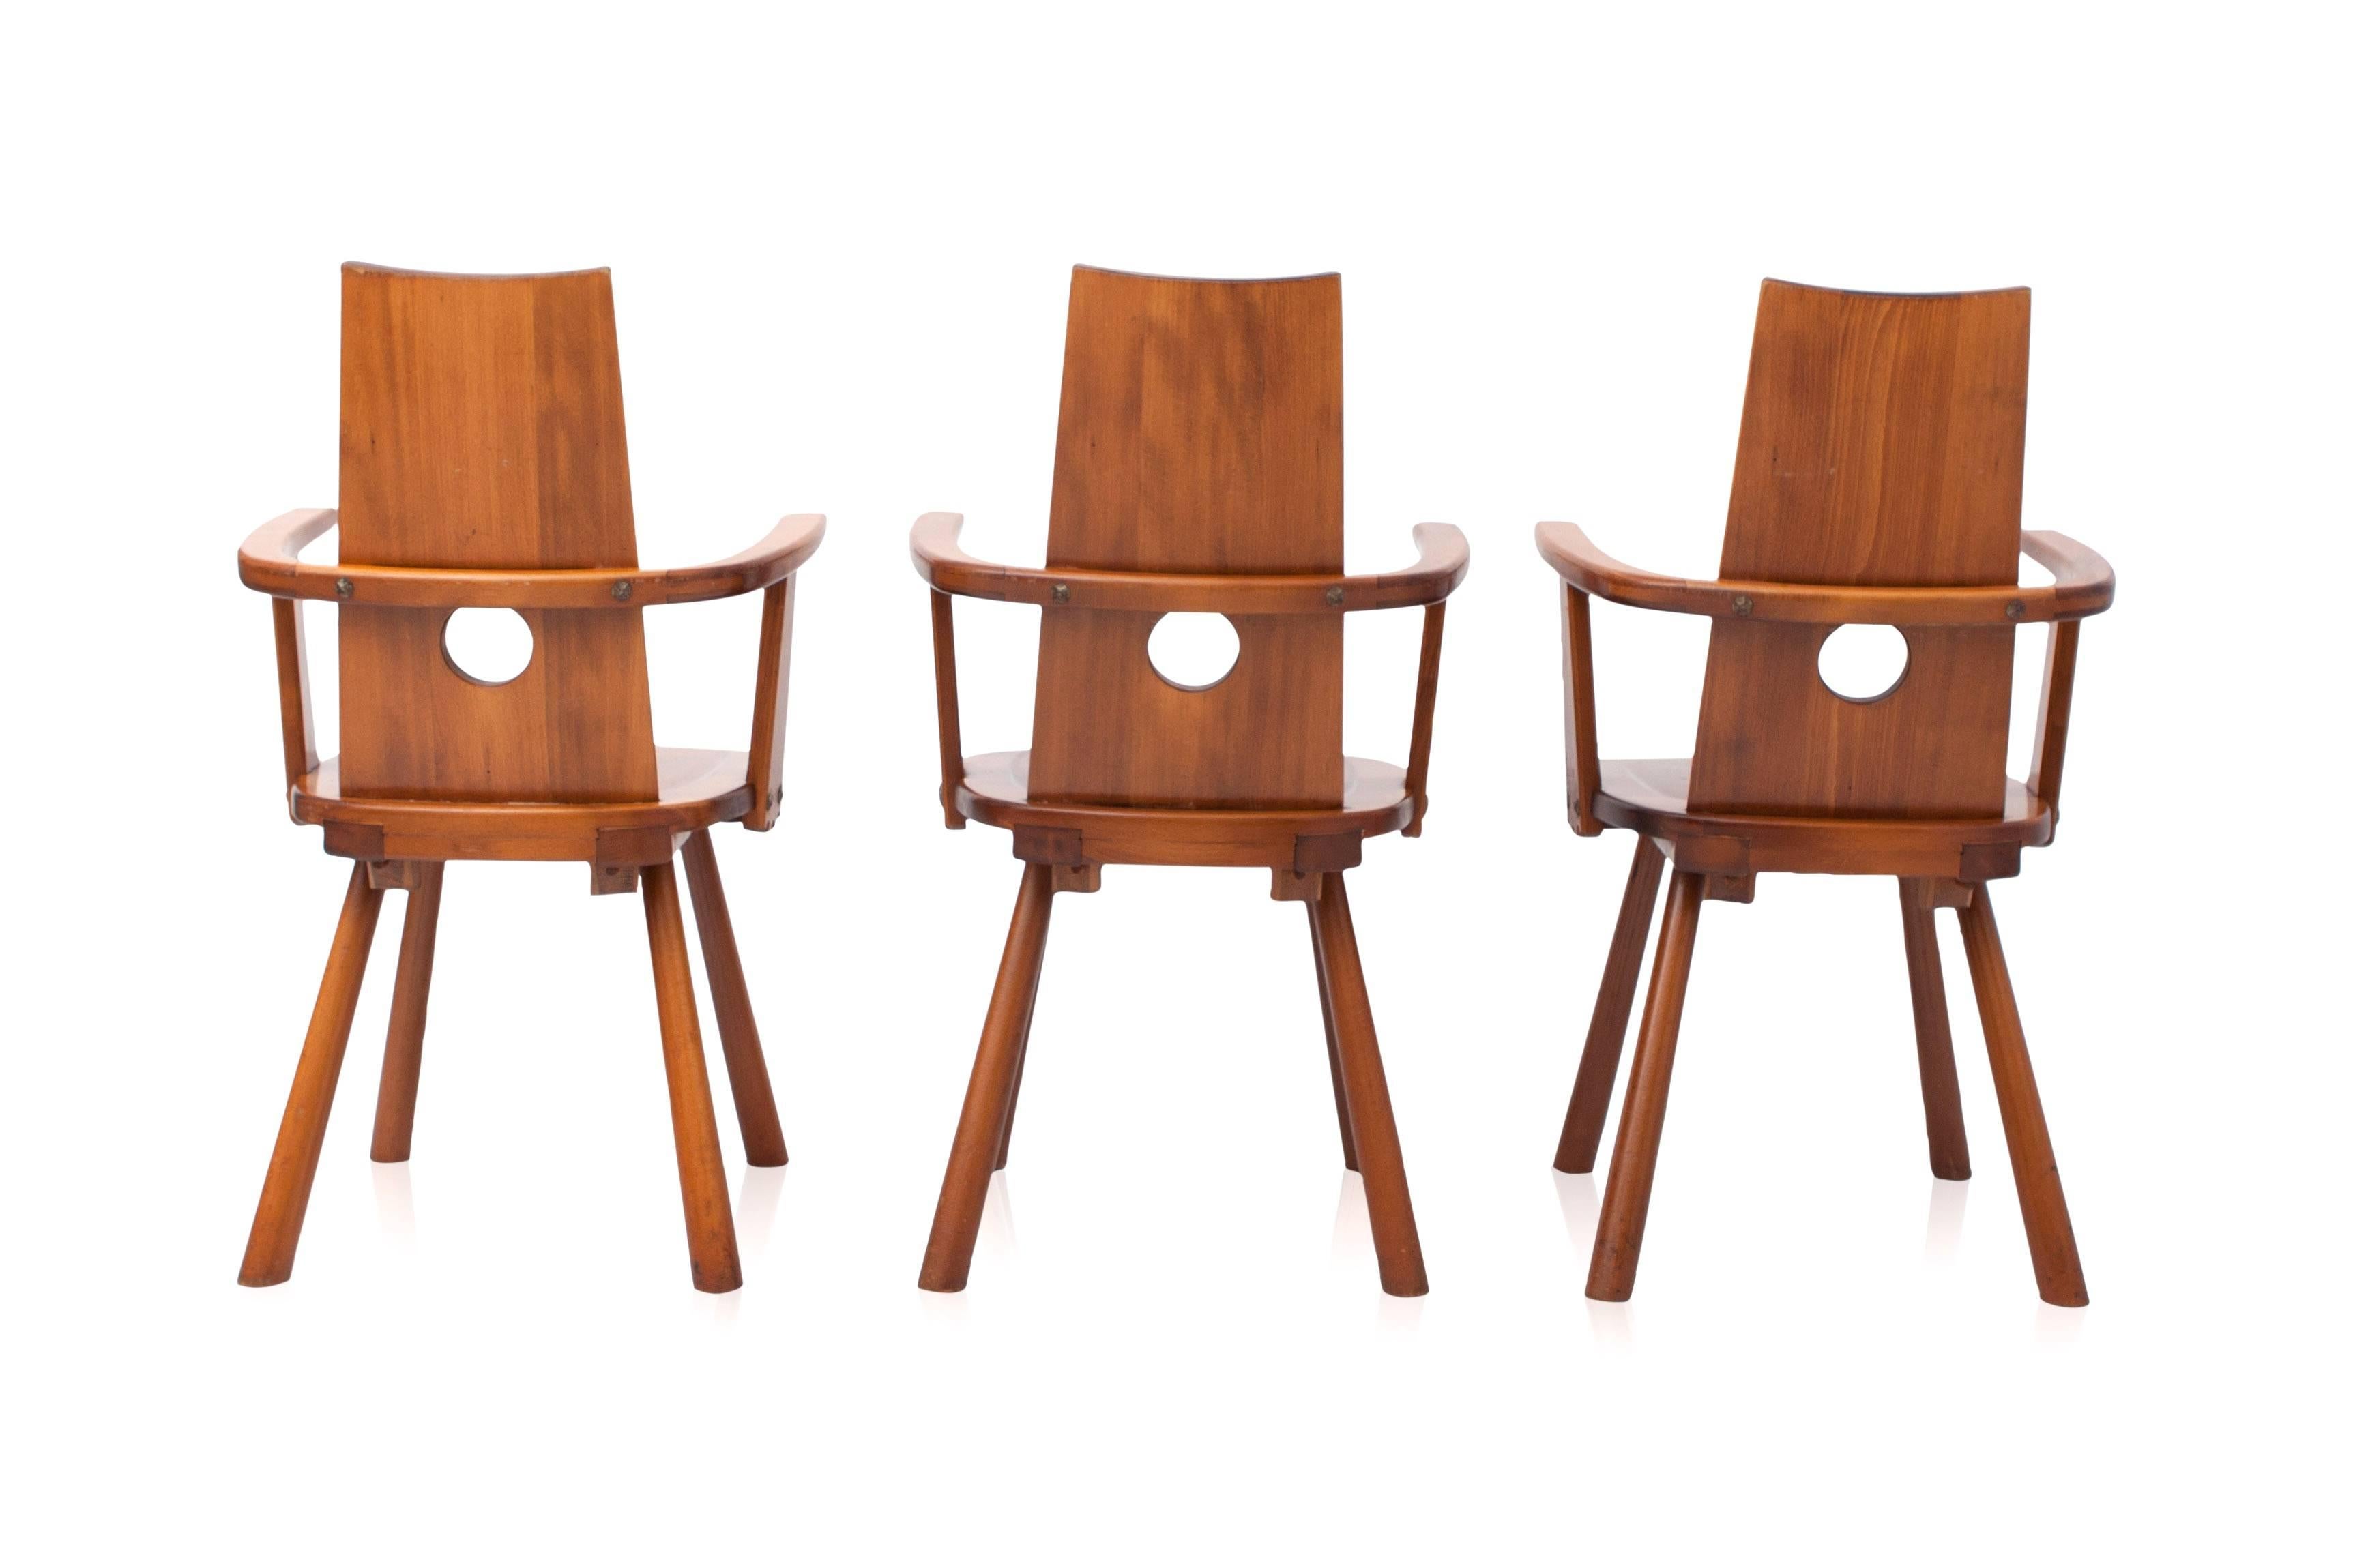 Vintage mid-century modern wooden dining chairs with armrests.
Modernist Folk Art inspired.
Serrated backs with a hole inside.
Would fit well in a pierre chapo style inspired interior
H 93 cm W 56 cm D 55 cm.